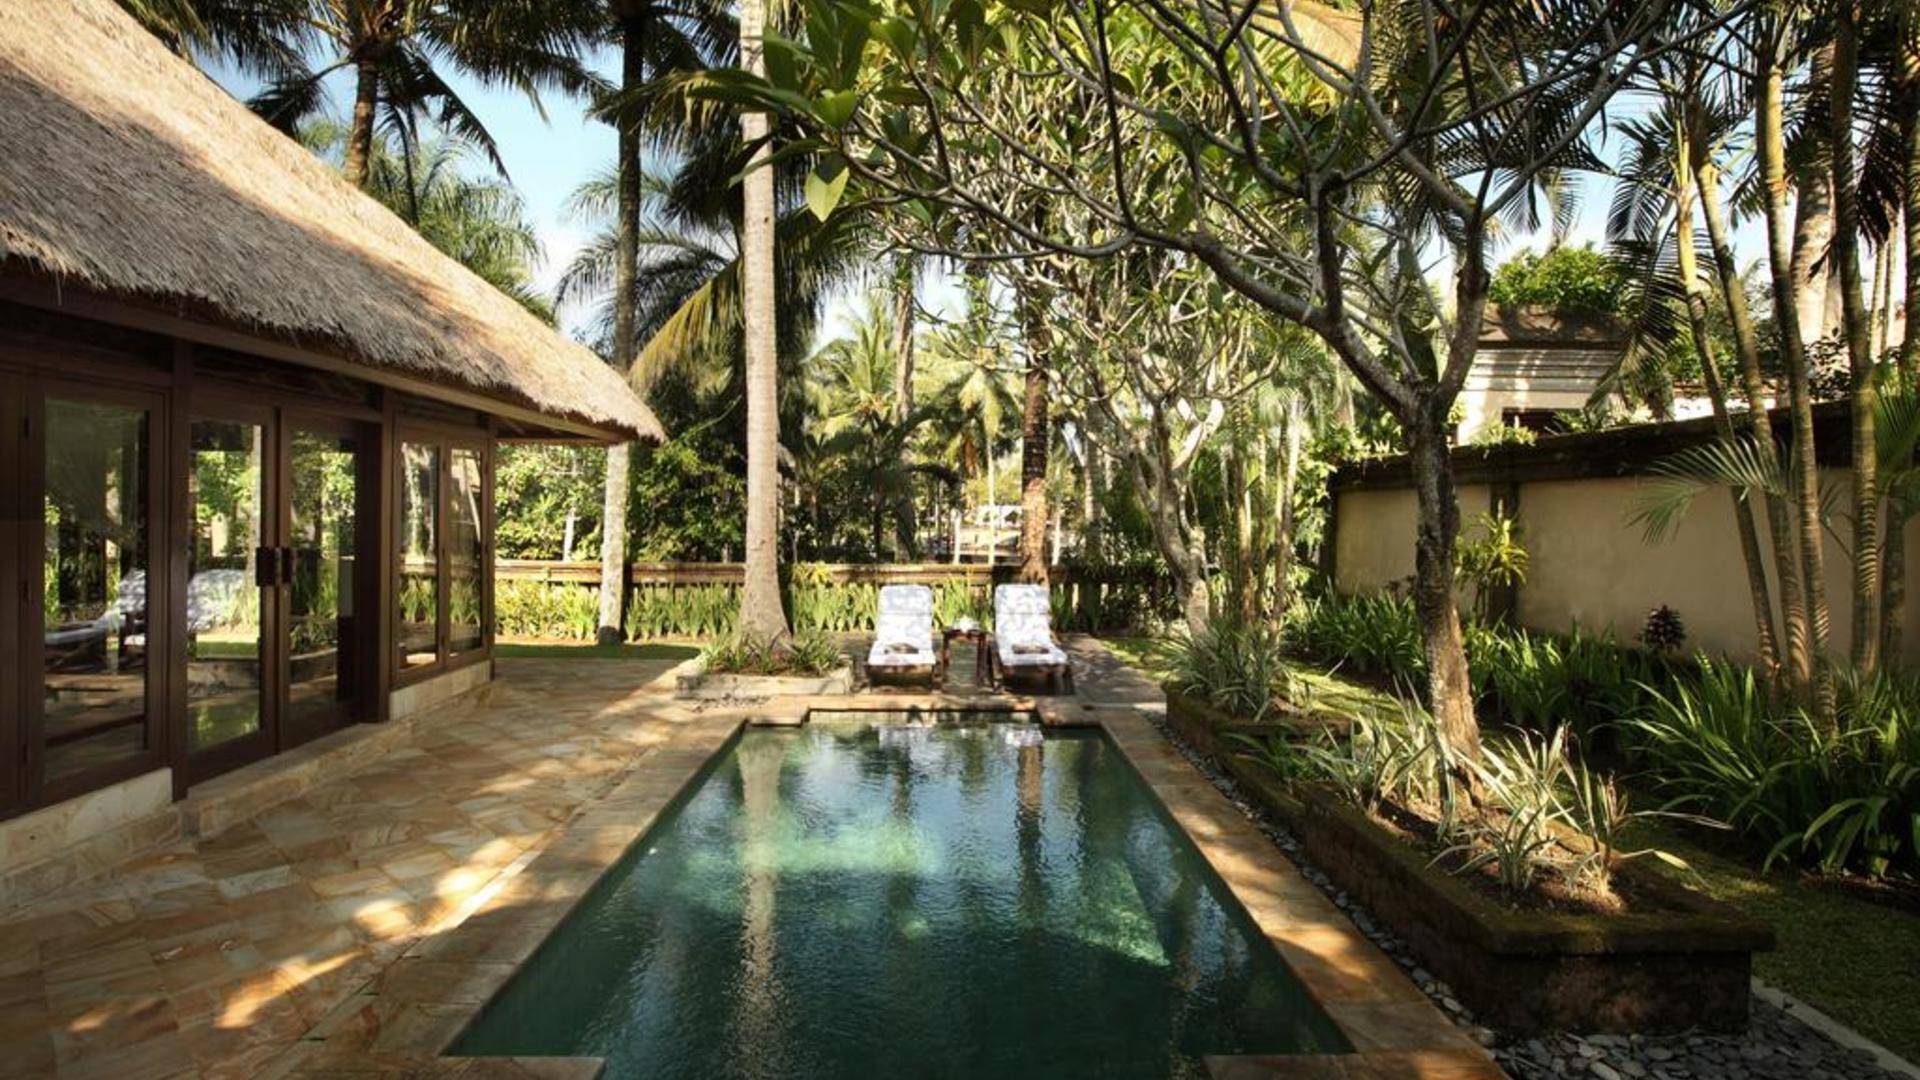 The ubud village resort & spa - chse certified: 2022 pictures, reviews, prices & deals | expedia.ca